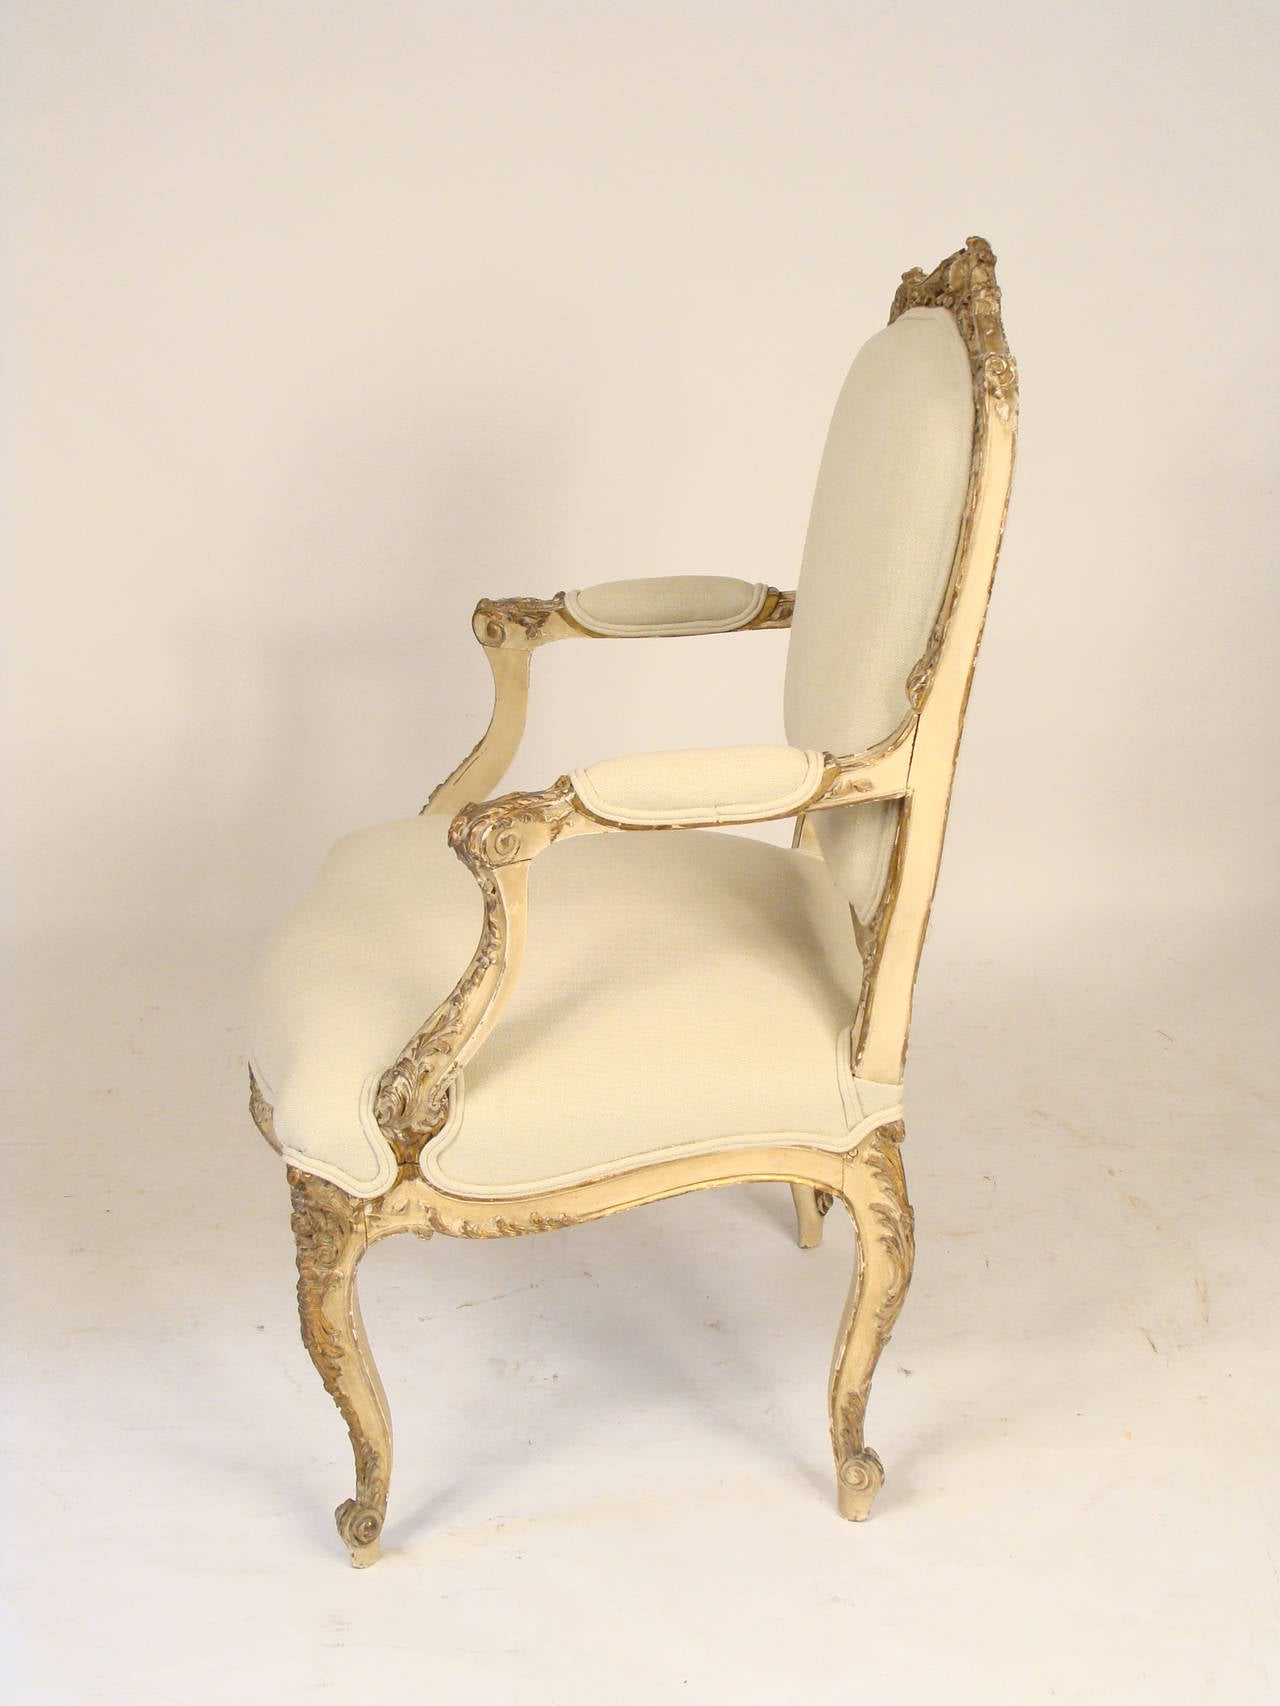 Louis XV style painted, gilded and carved open armchair, late 19th century. Nice old worn paint and very fine quality foliate carving.